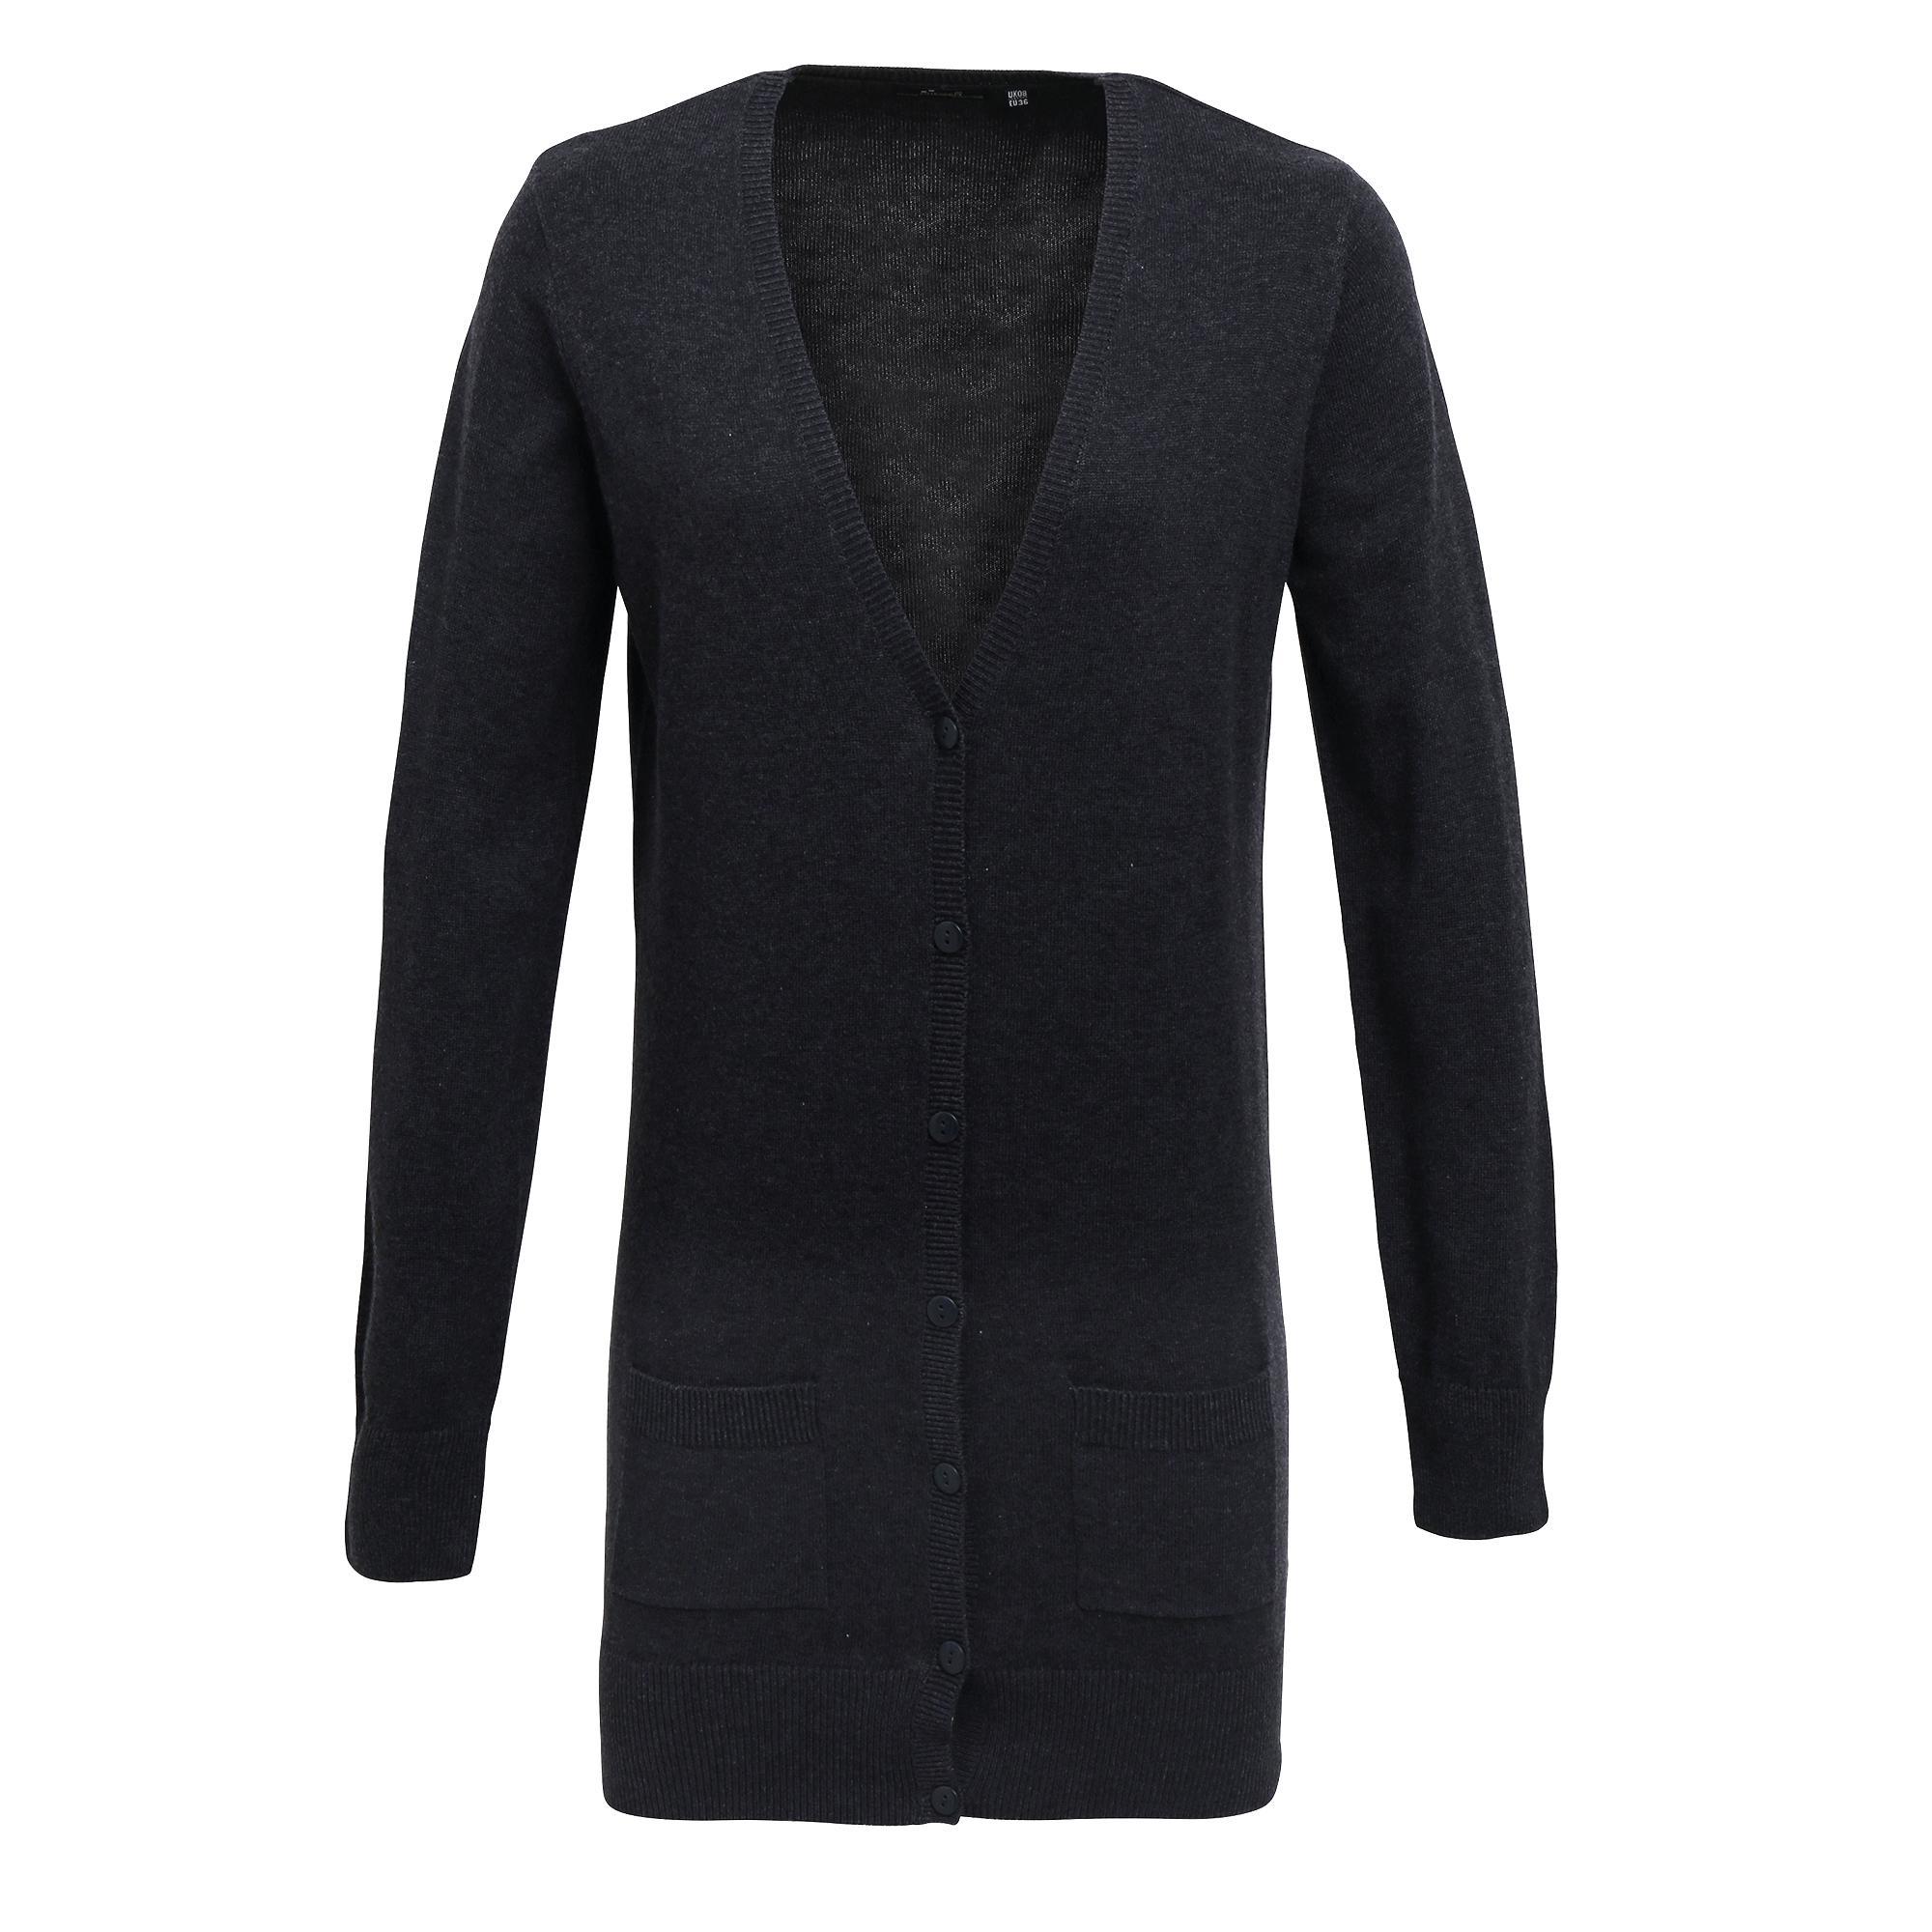 Premier Womens/Ladies Longline V Neck Knitted Cardigan (Charcoal) (10)